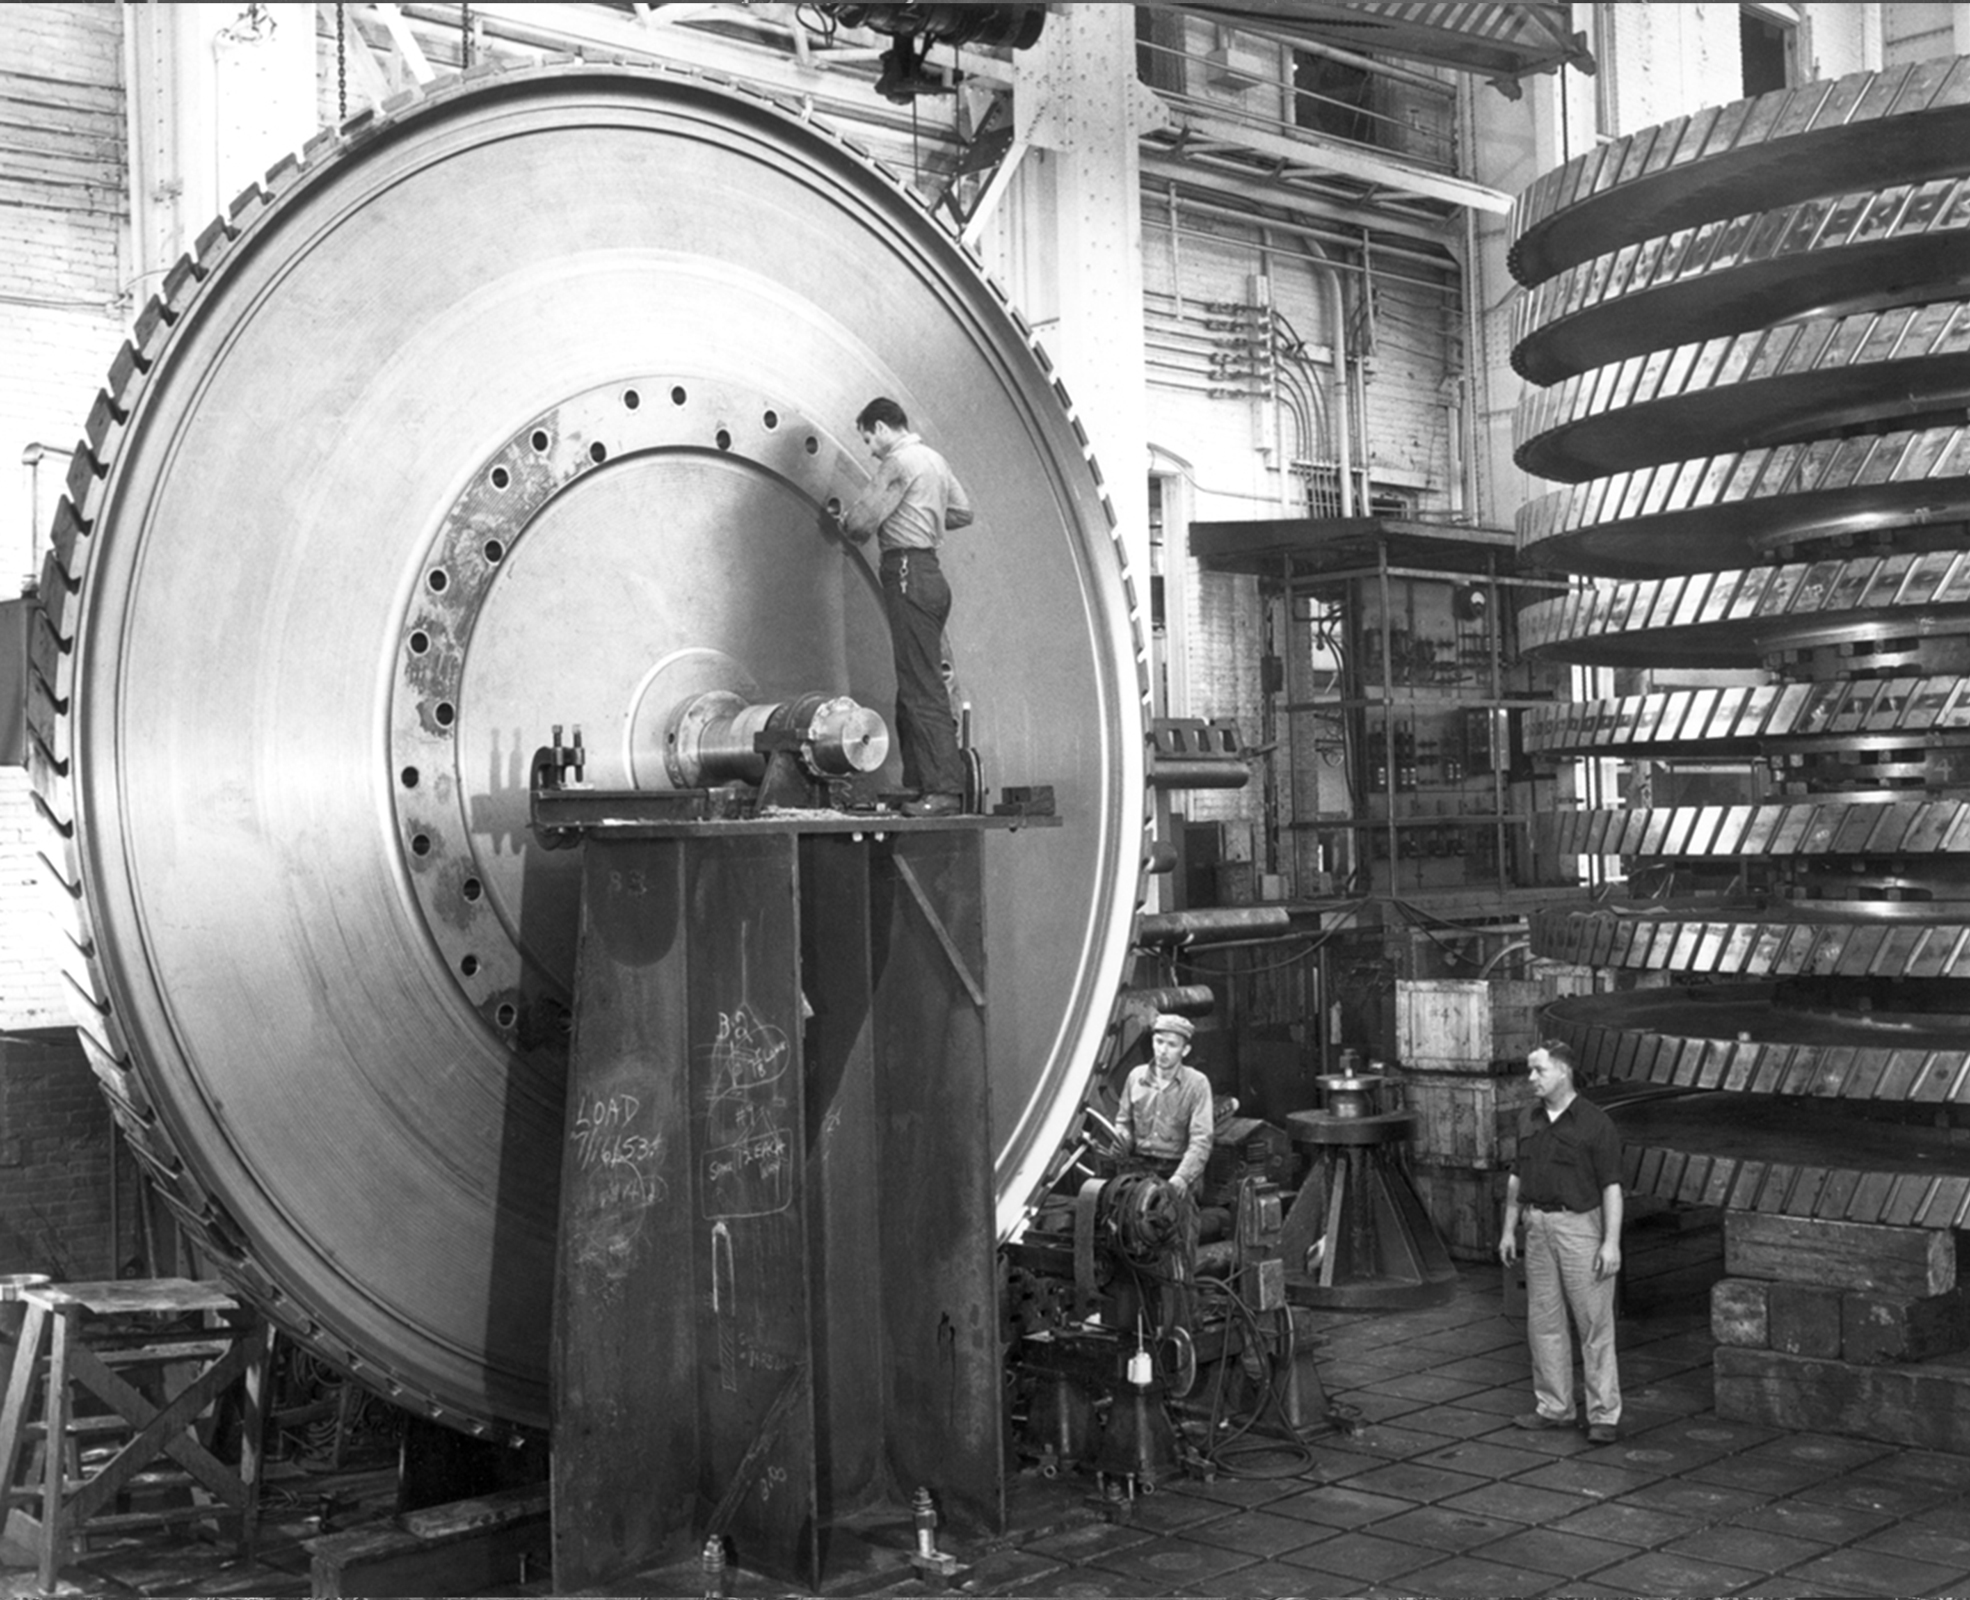 A man repairs a huge, circular gear, while standing atop a tall metal platform attached to the big machine. 2 men stand beside a stack of 10 huge gears.